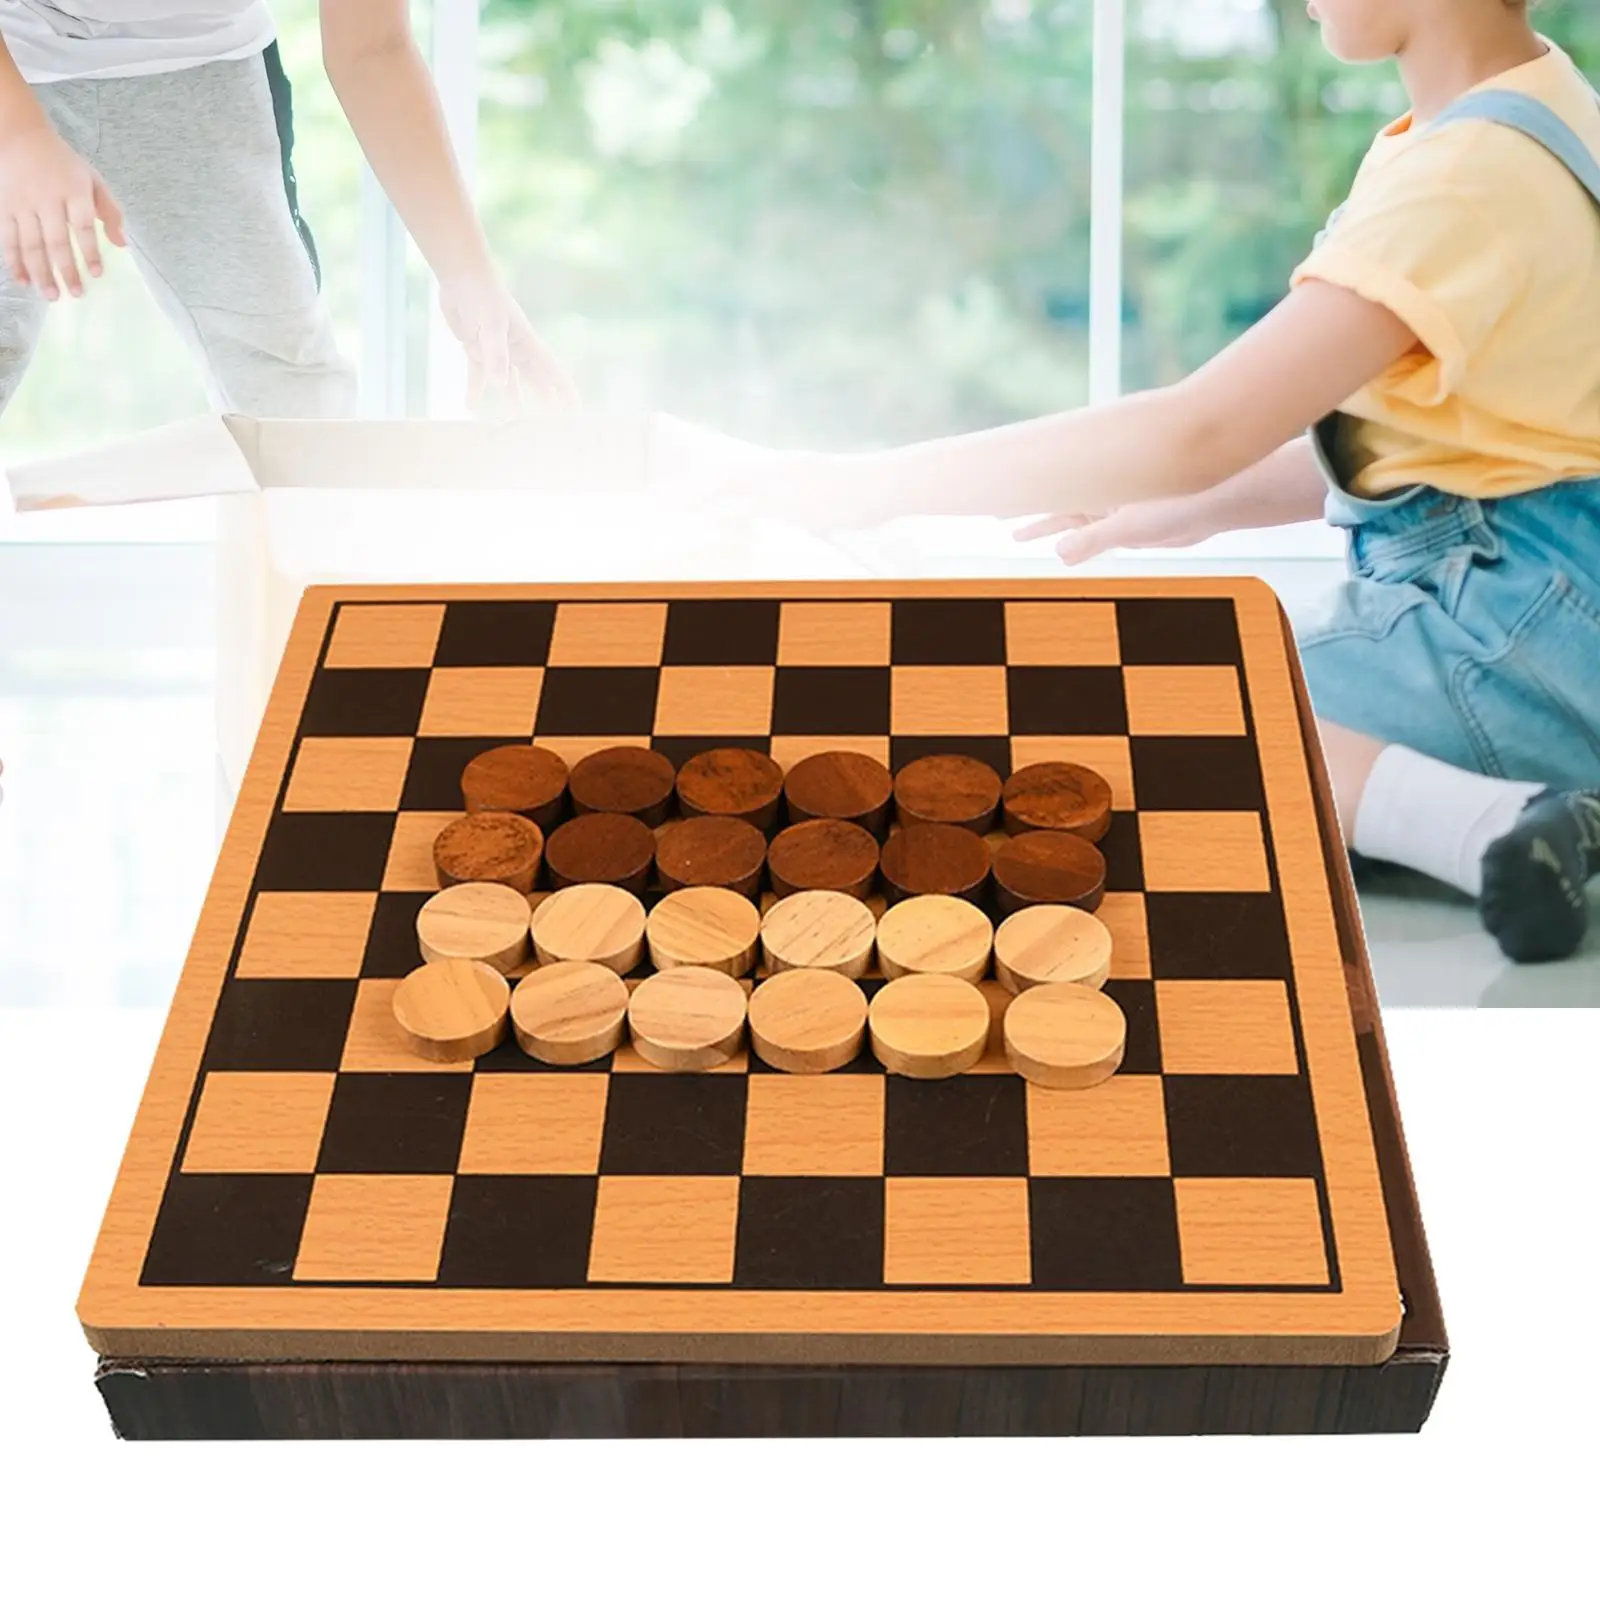 Chess Game Set Vintage Style Playing Toys Chess Board for Children